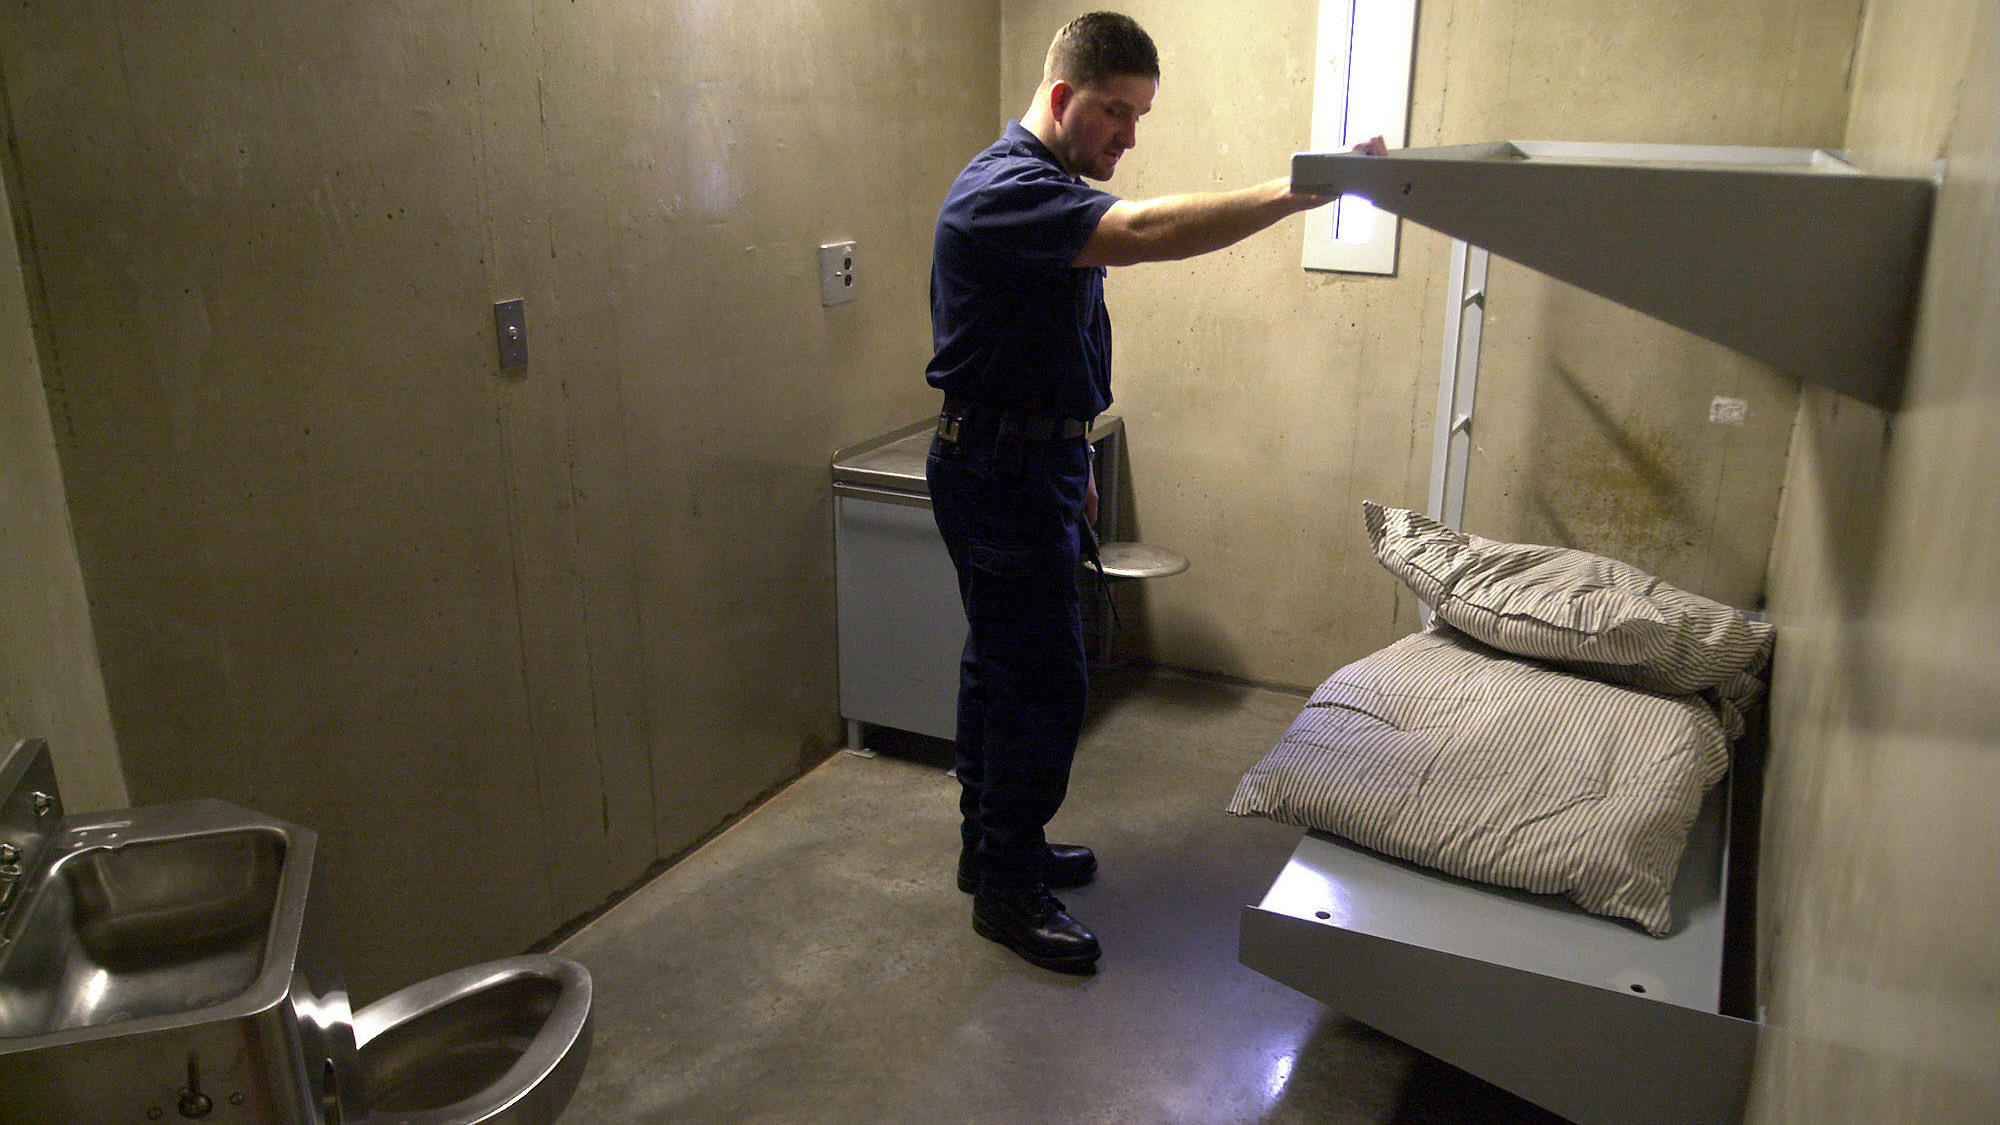 Advocates Push To Bring Solitary Confinement Out Of The Shadows | West ...